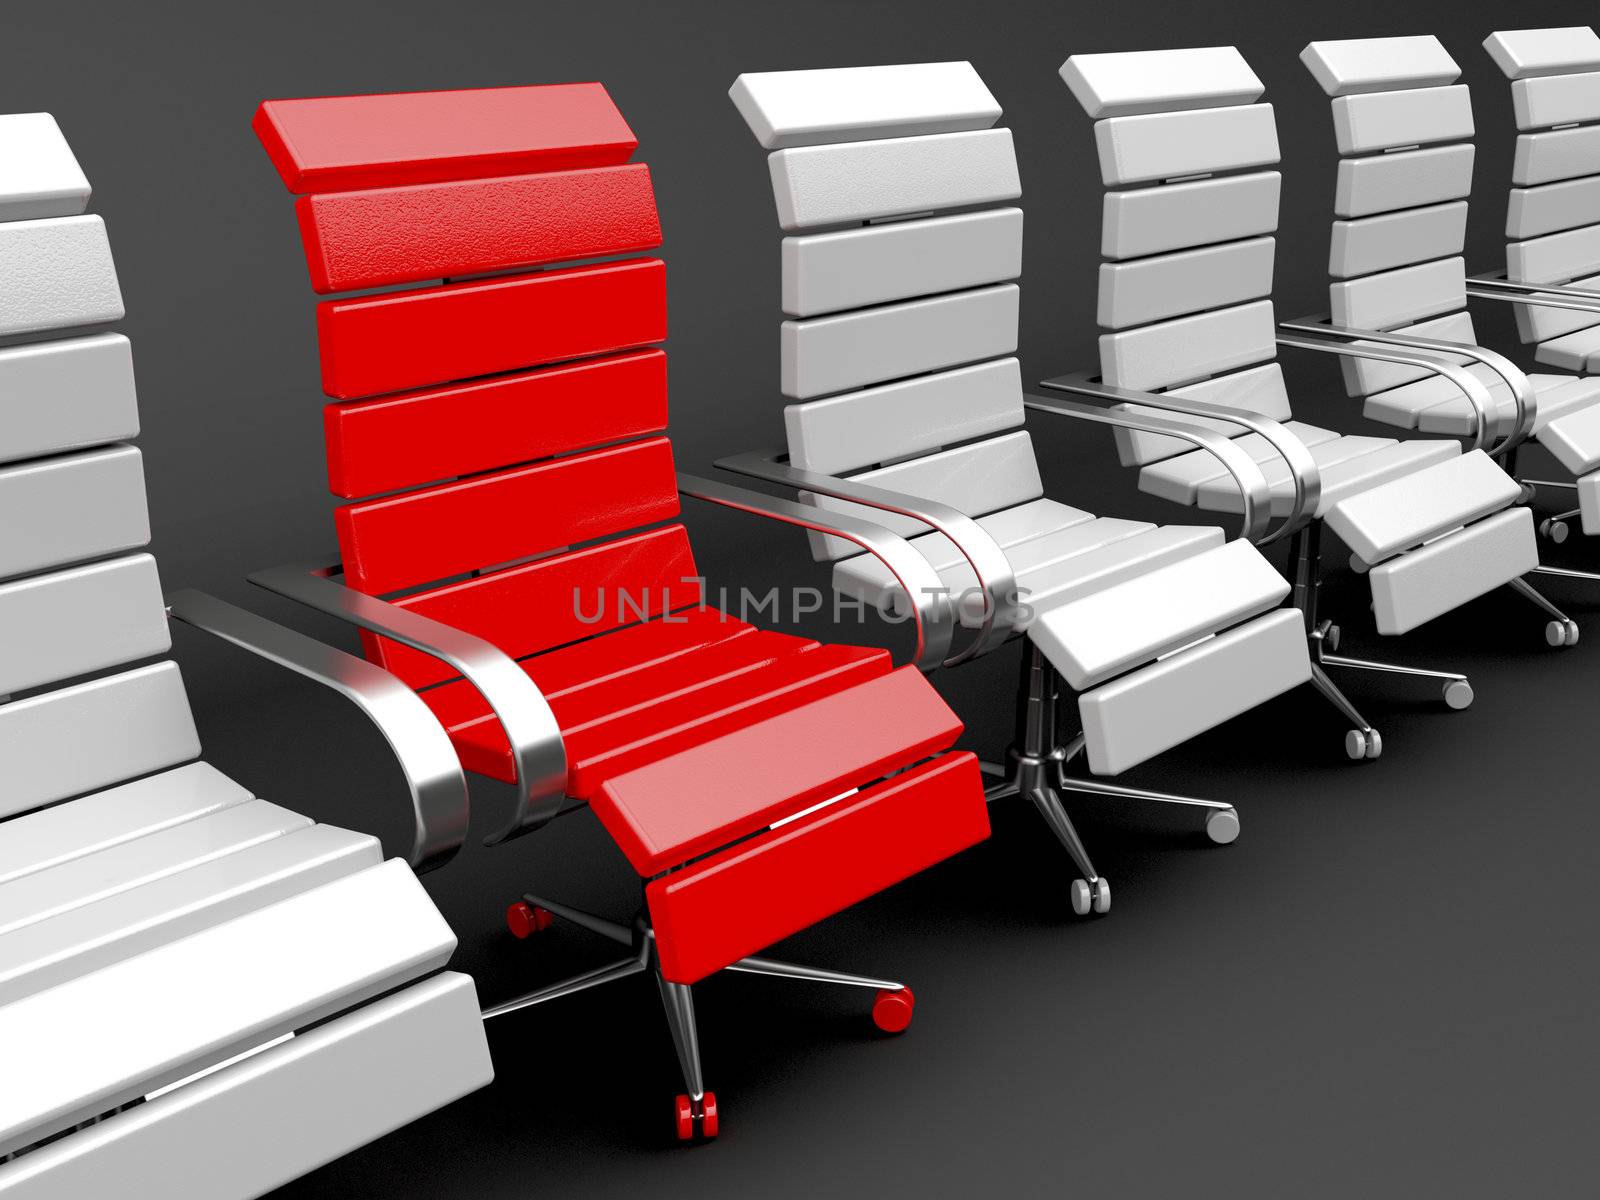 Red armchair for leader and gray for others - leadership concept